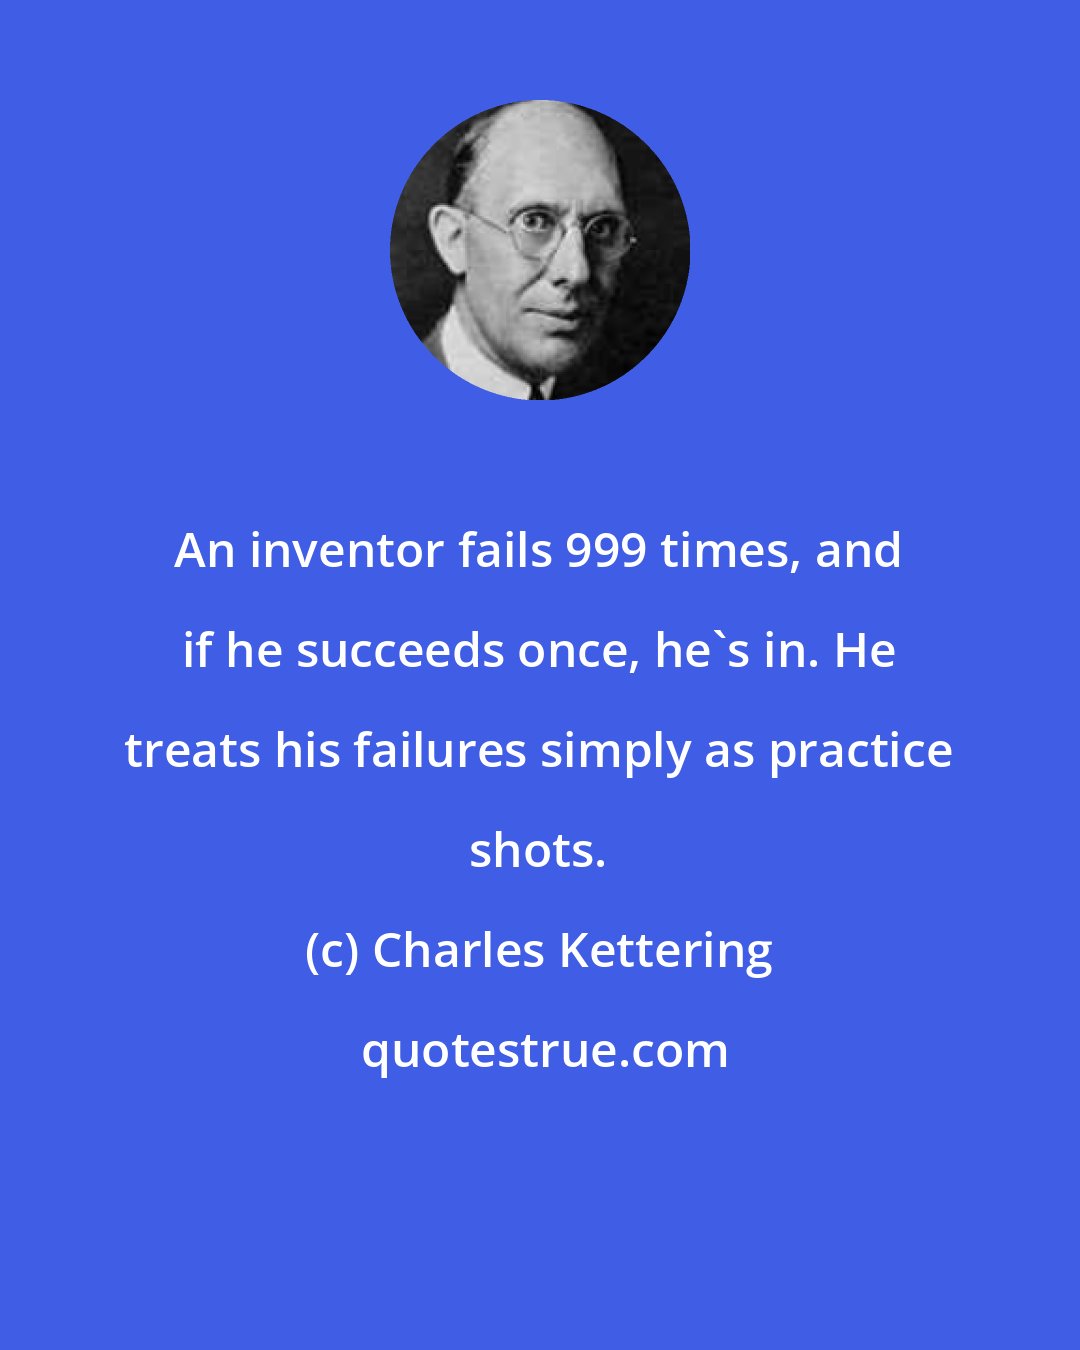 Charles Kettering: An inventor fails 999 times, and if he succeeds once, he's in. He treats his failures simply as practice shots.